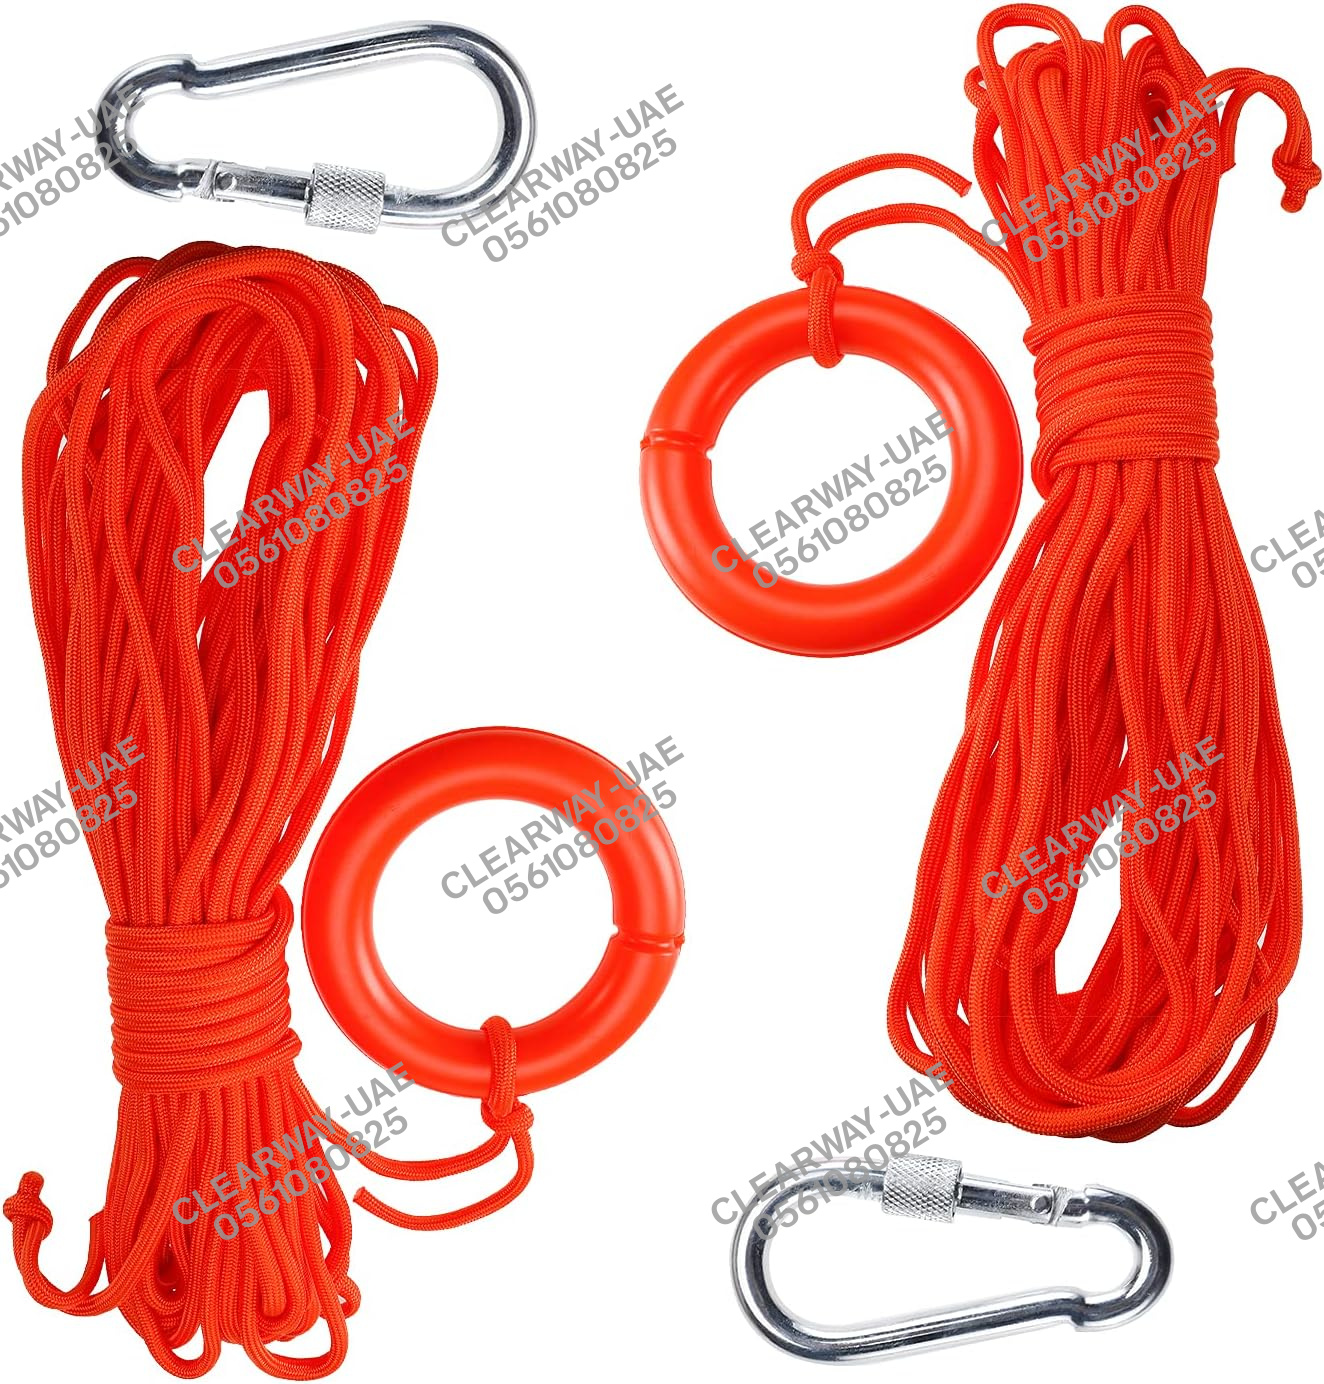 FLOATING LIFE SAVING ROPE SUPPLIER IN ABUDHABI UAE CLEARWAY RYXO SAFETY18